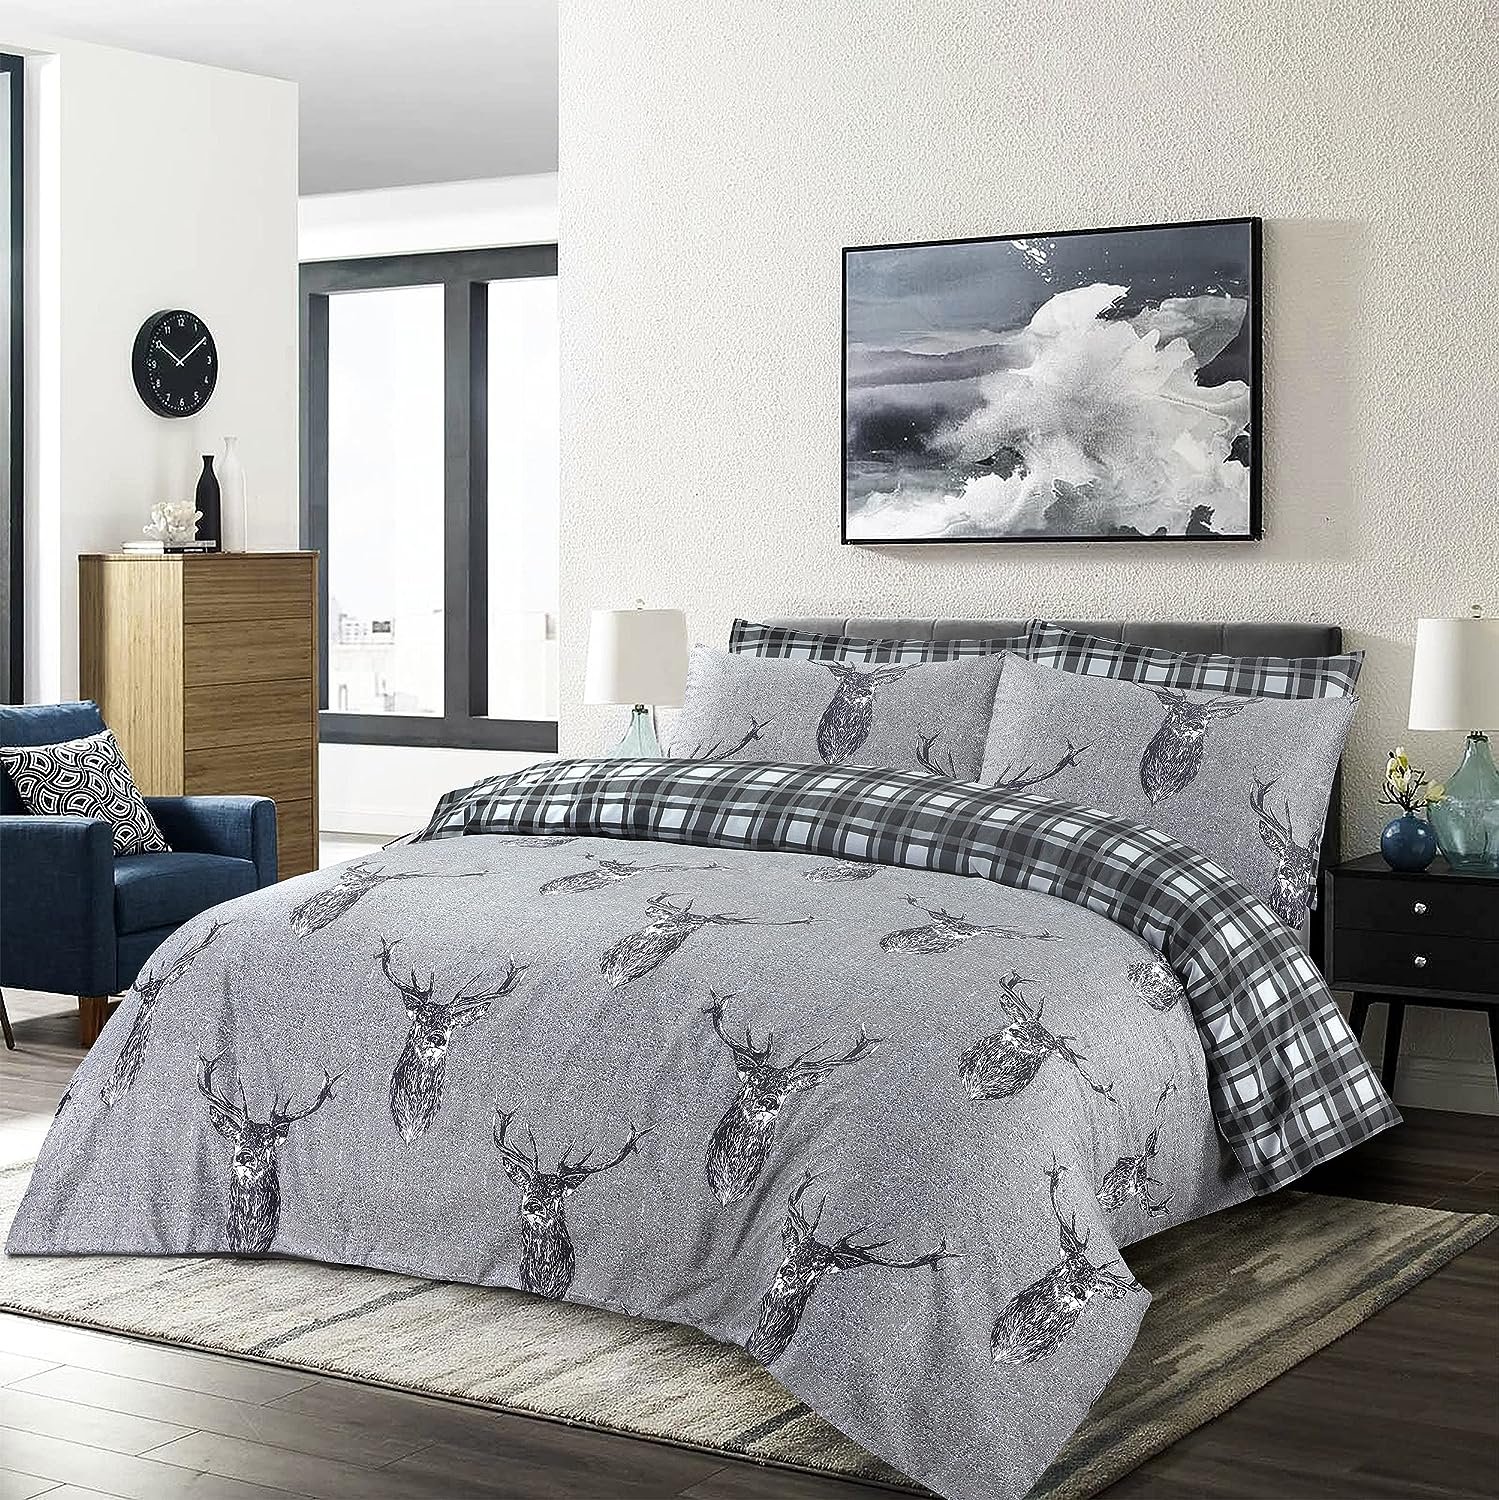 Stag Duvet Cover Set Review